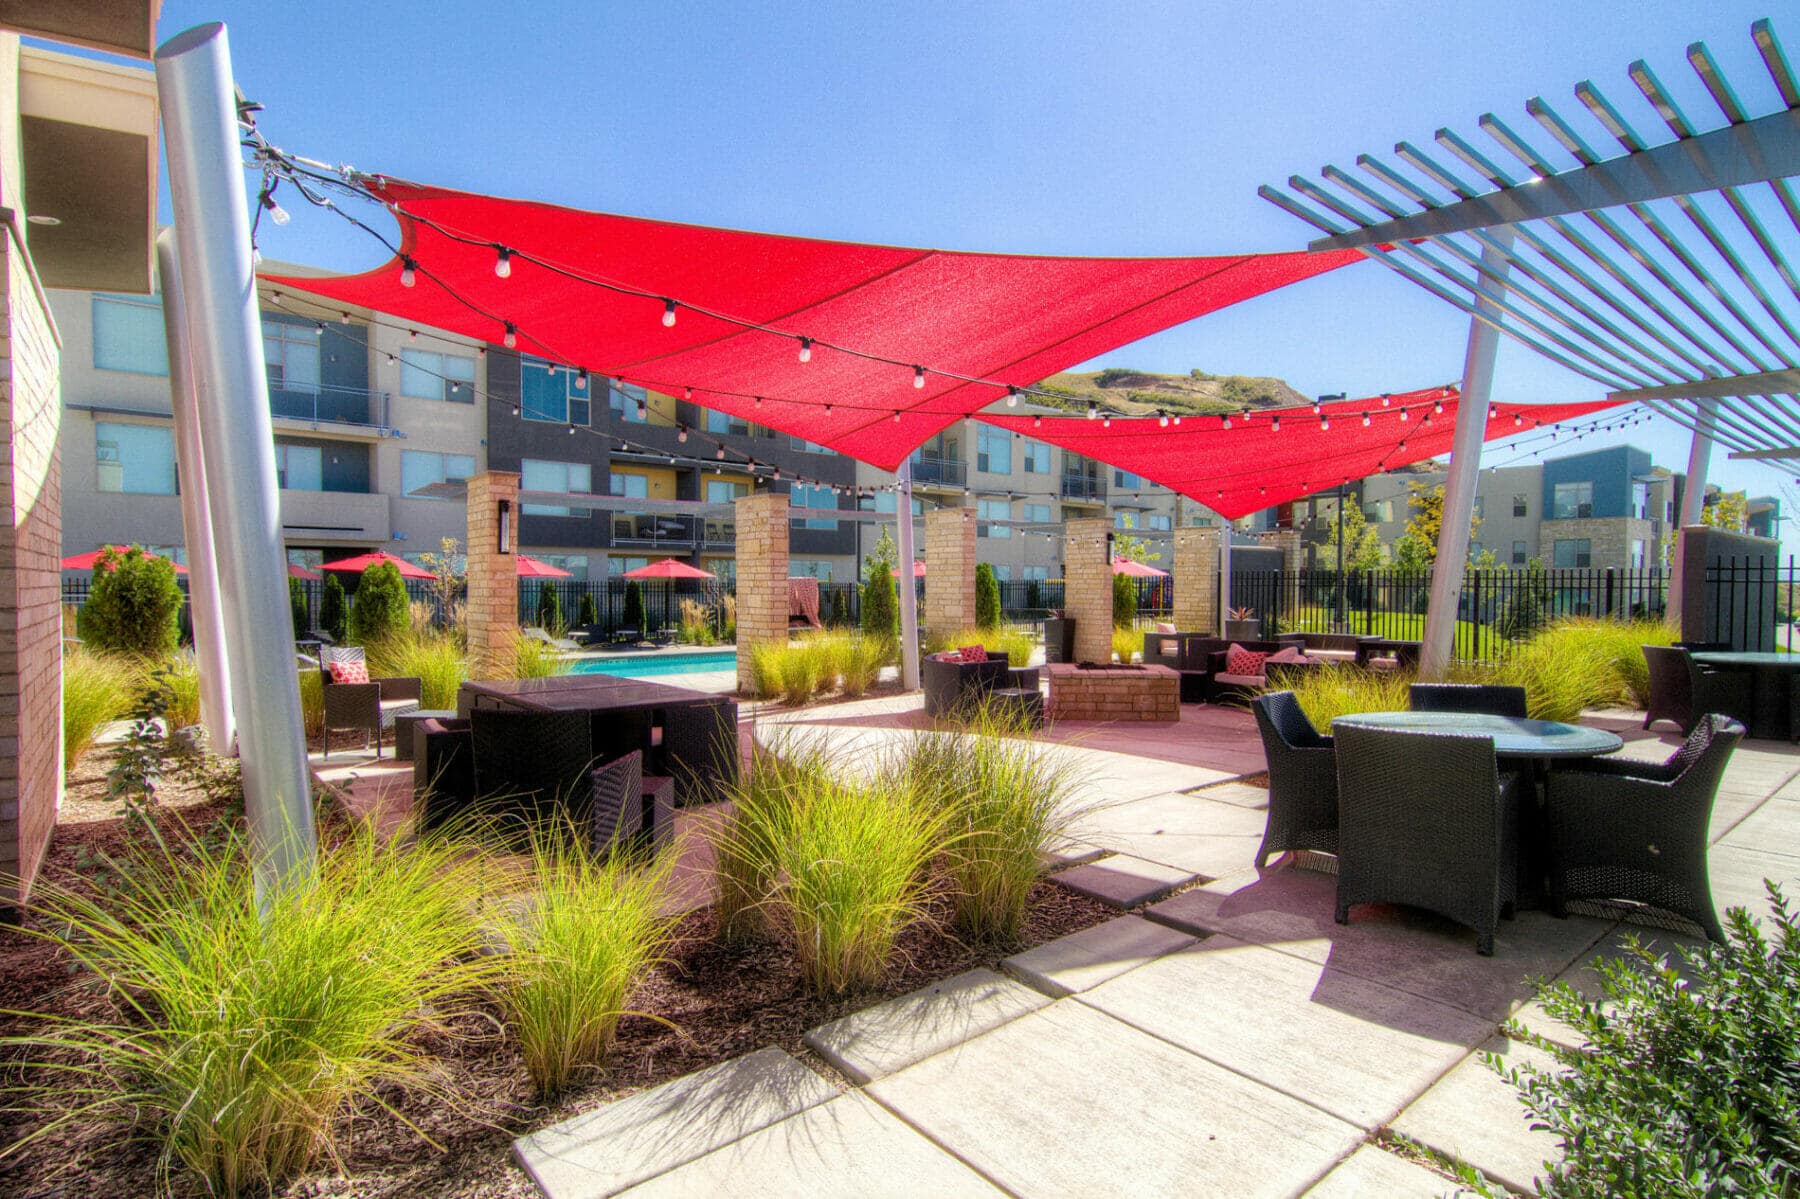 Patio Design at Eaglewood Lofts in Northern Salt Lake | Salt Lake City Multifamily Architects | Think Architecture